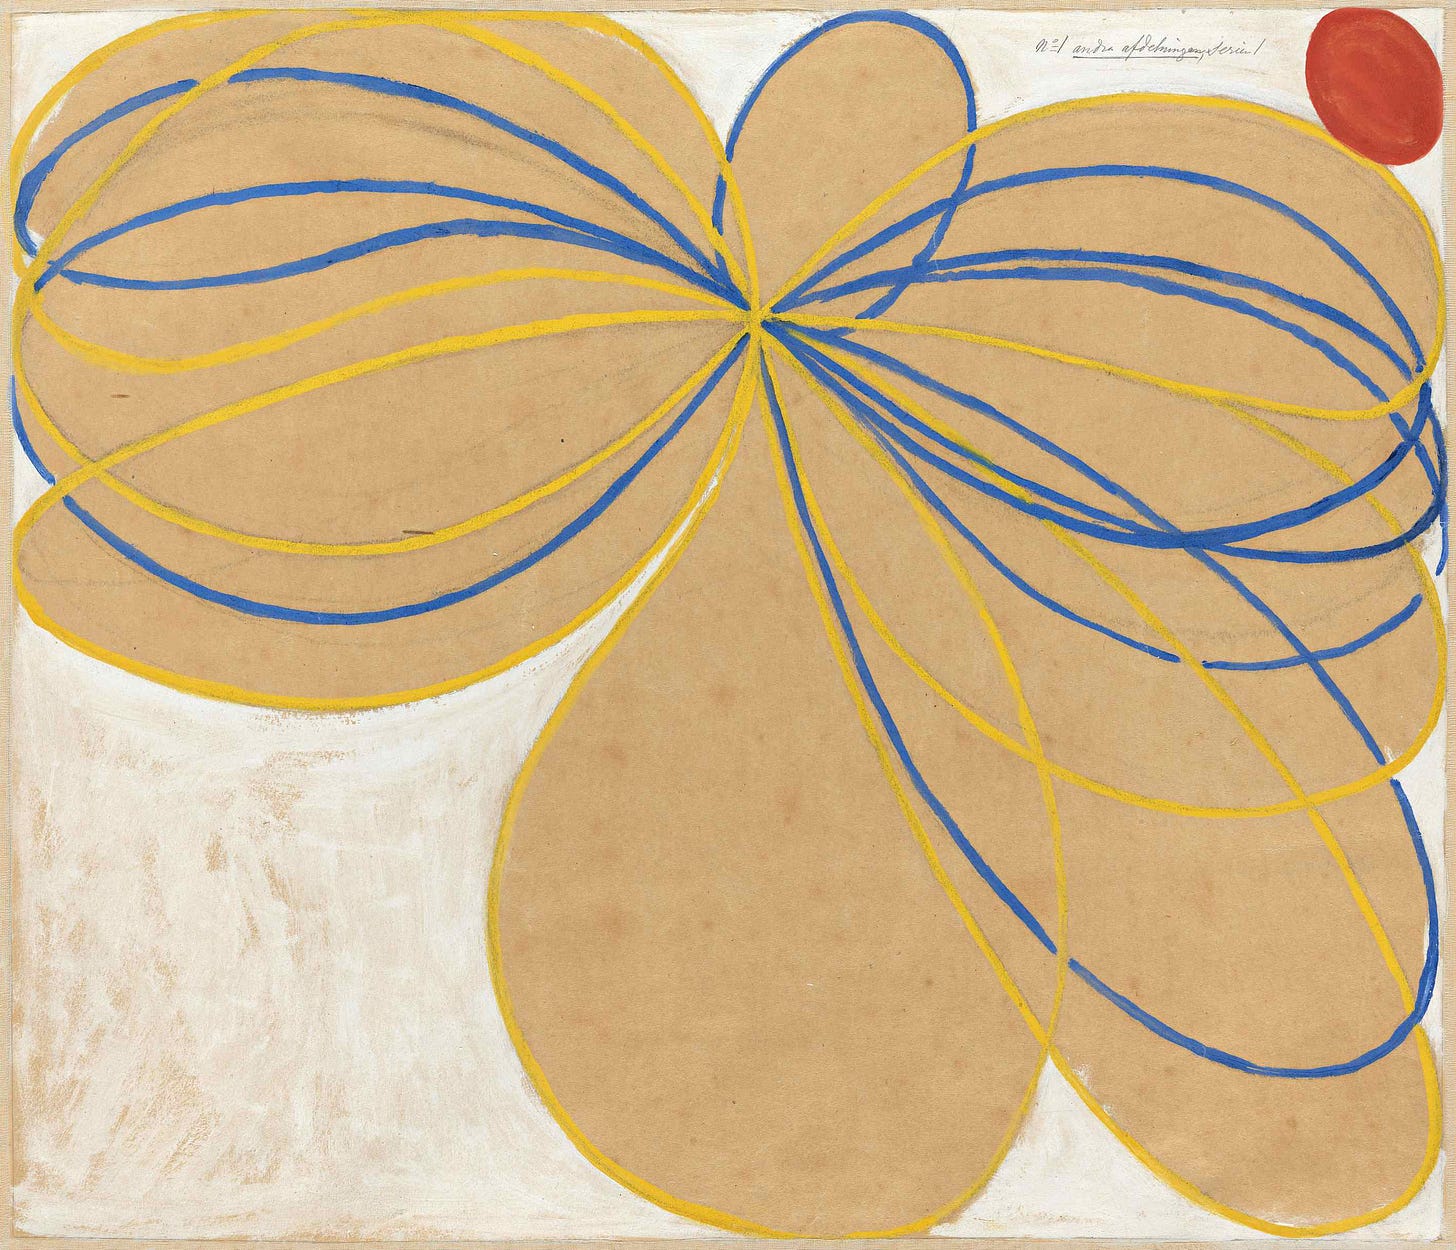 The Seven-Pointed Star No. 1 by Hilma af Klint